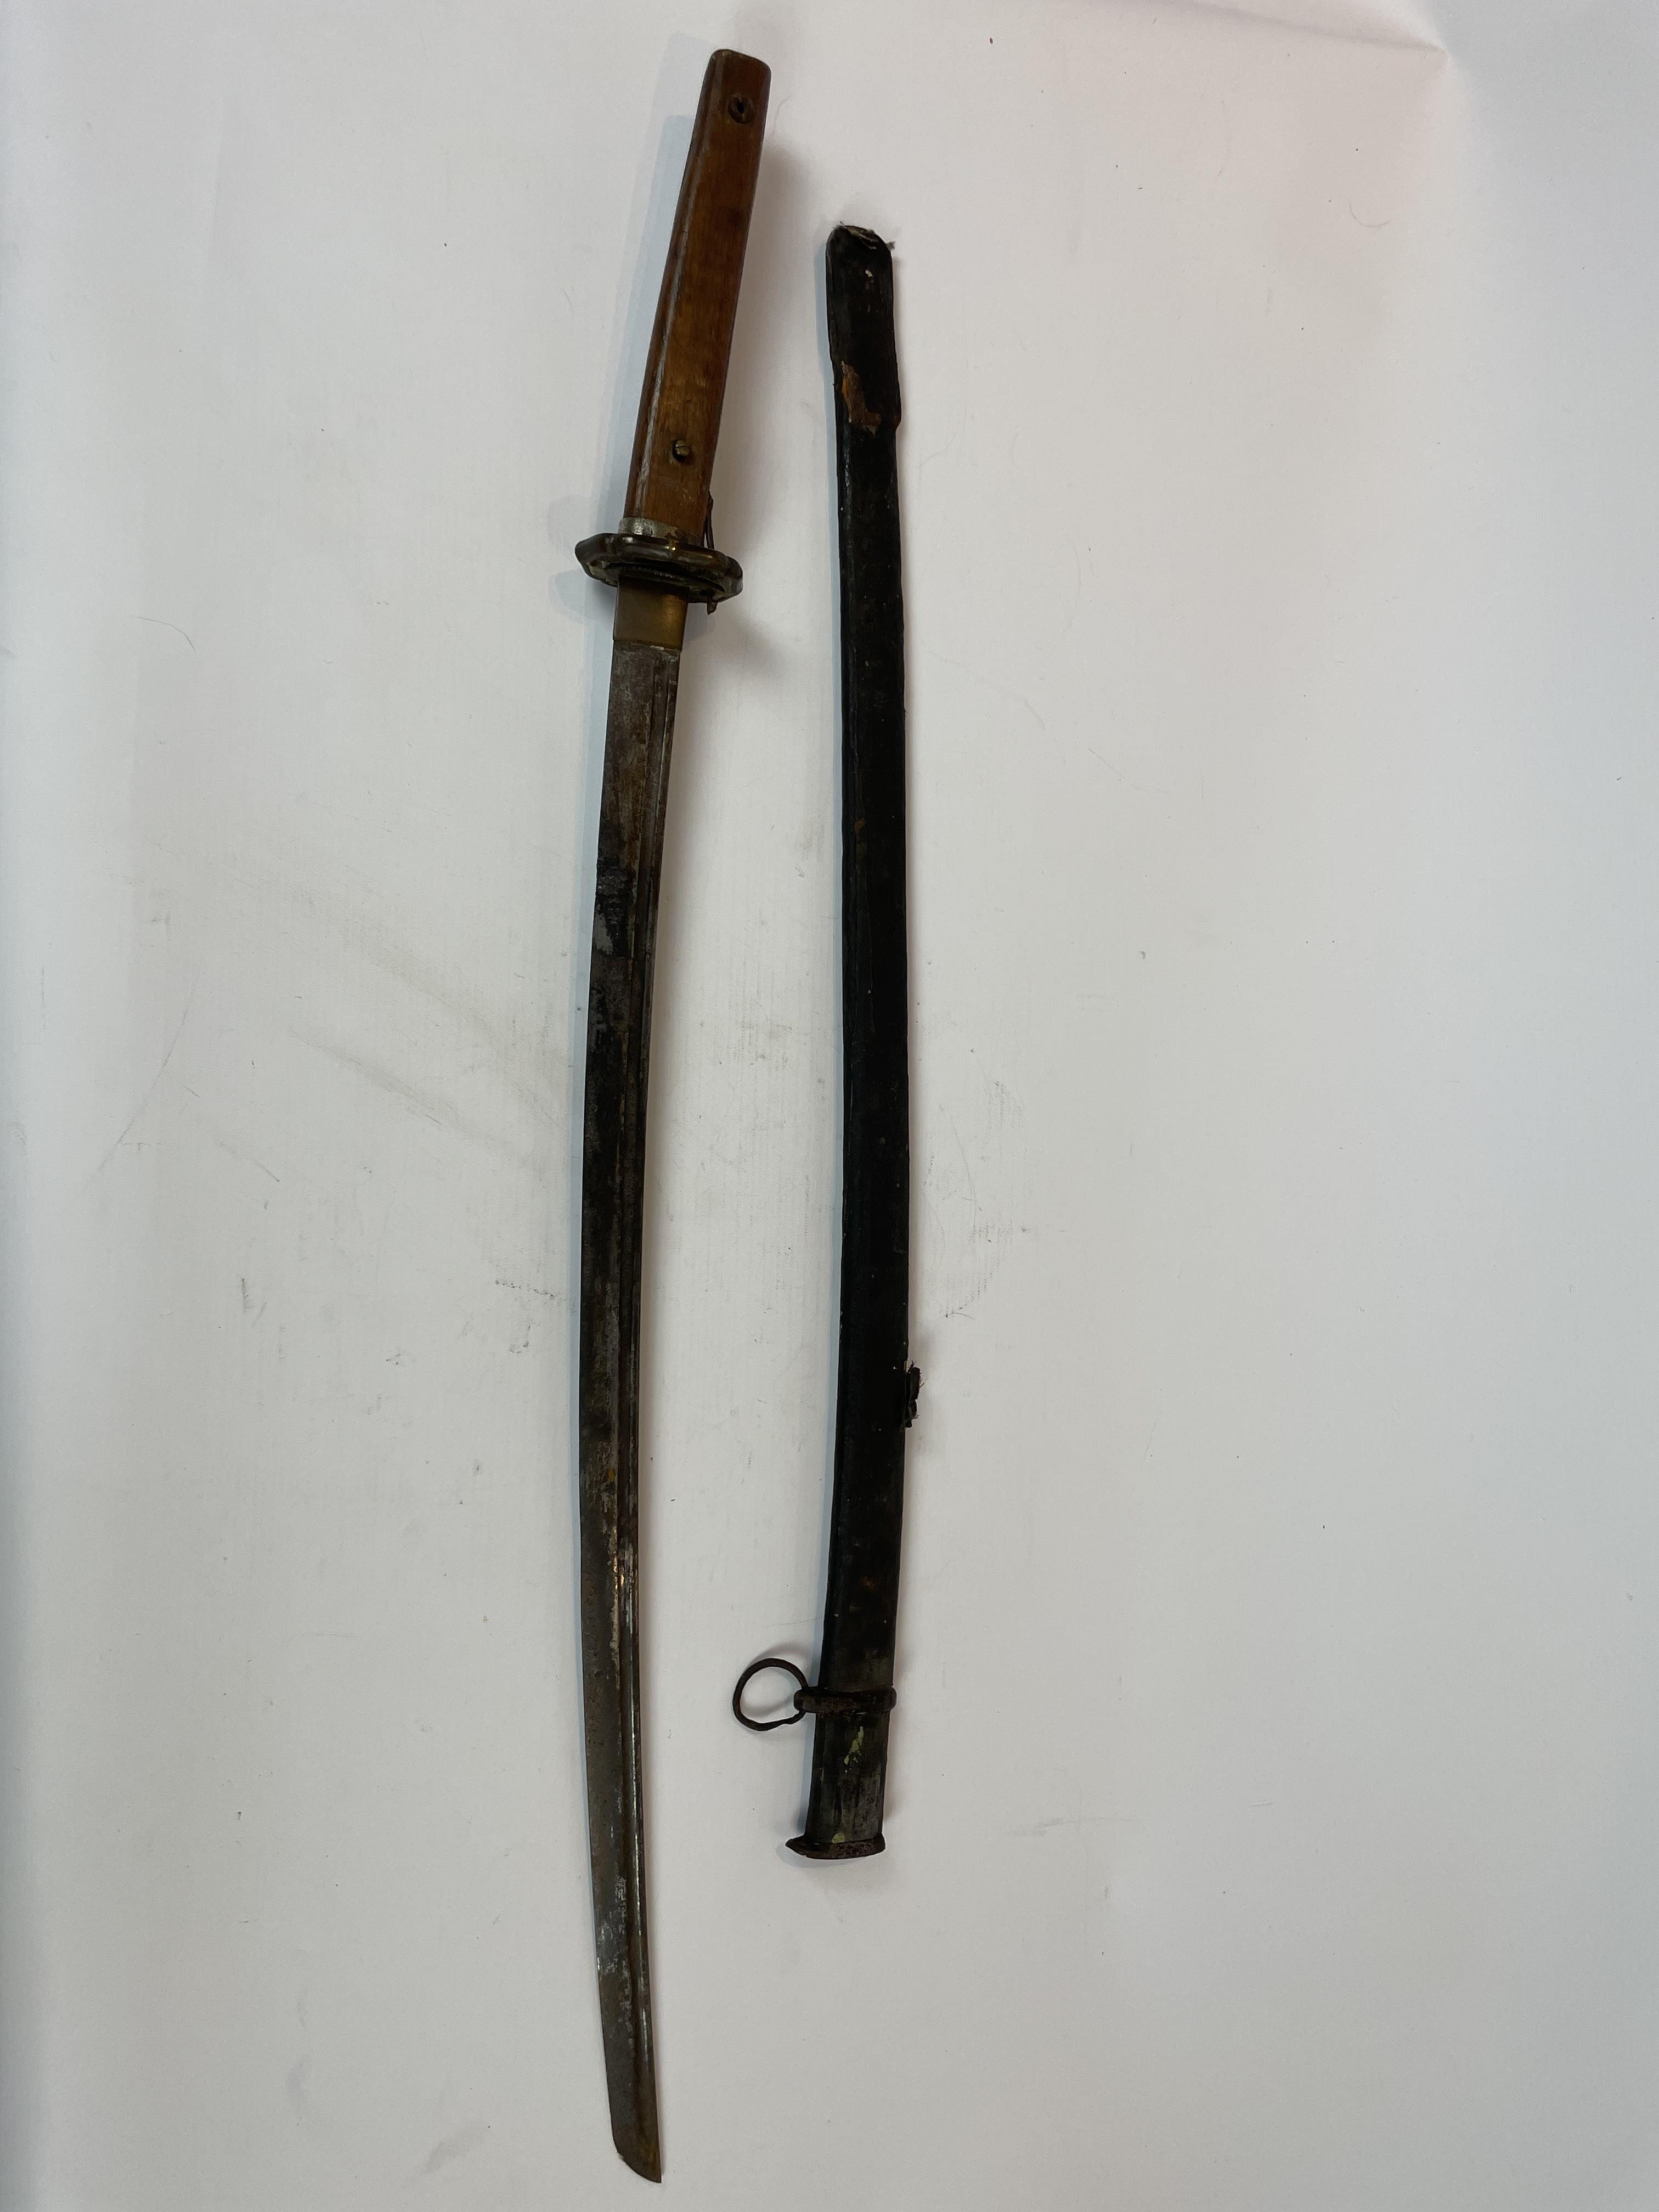 Japanese Samurai Sword In Leather Scabbard. Early 20th Century - Image 2 of 24